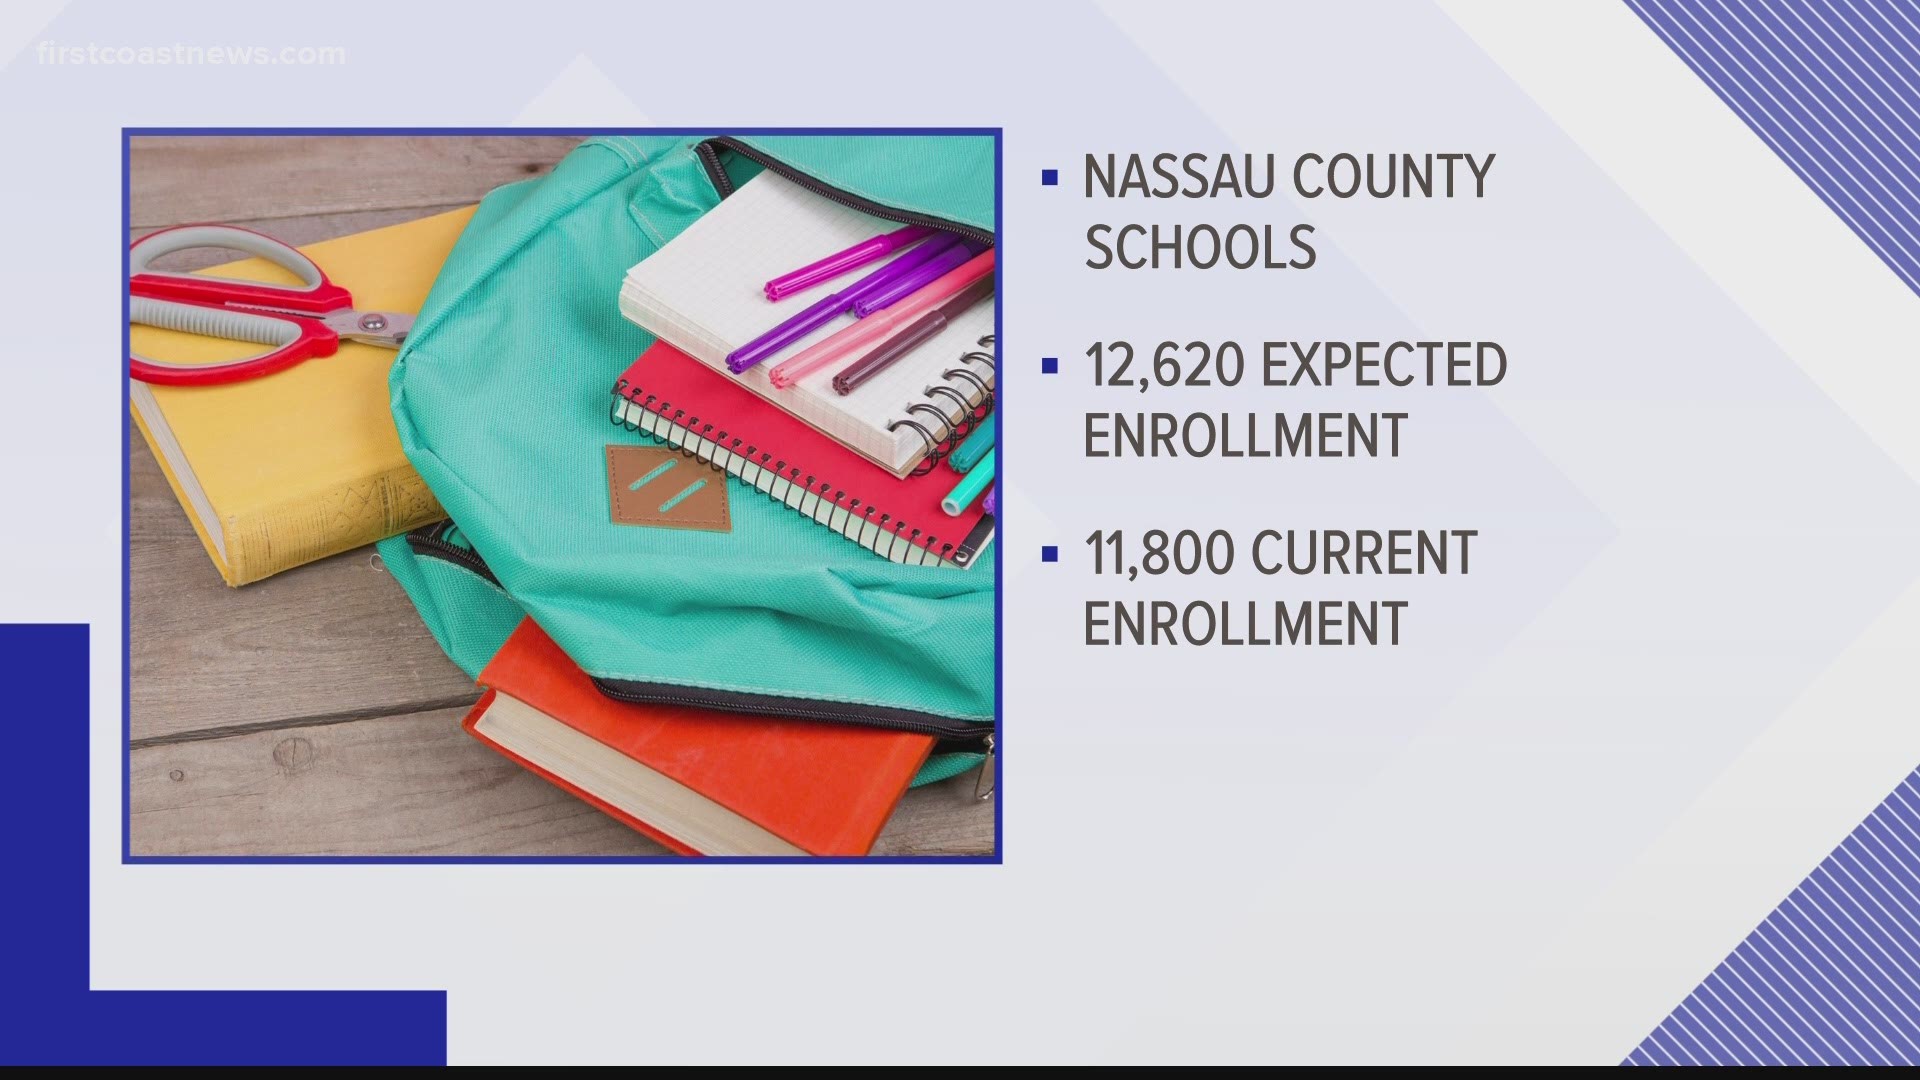 The district says the shortfall is a result of a decline in expected enrollment.